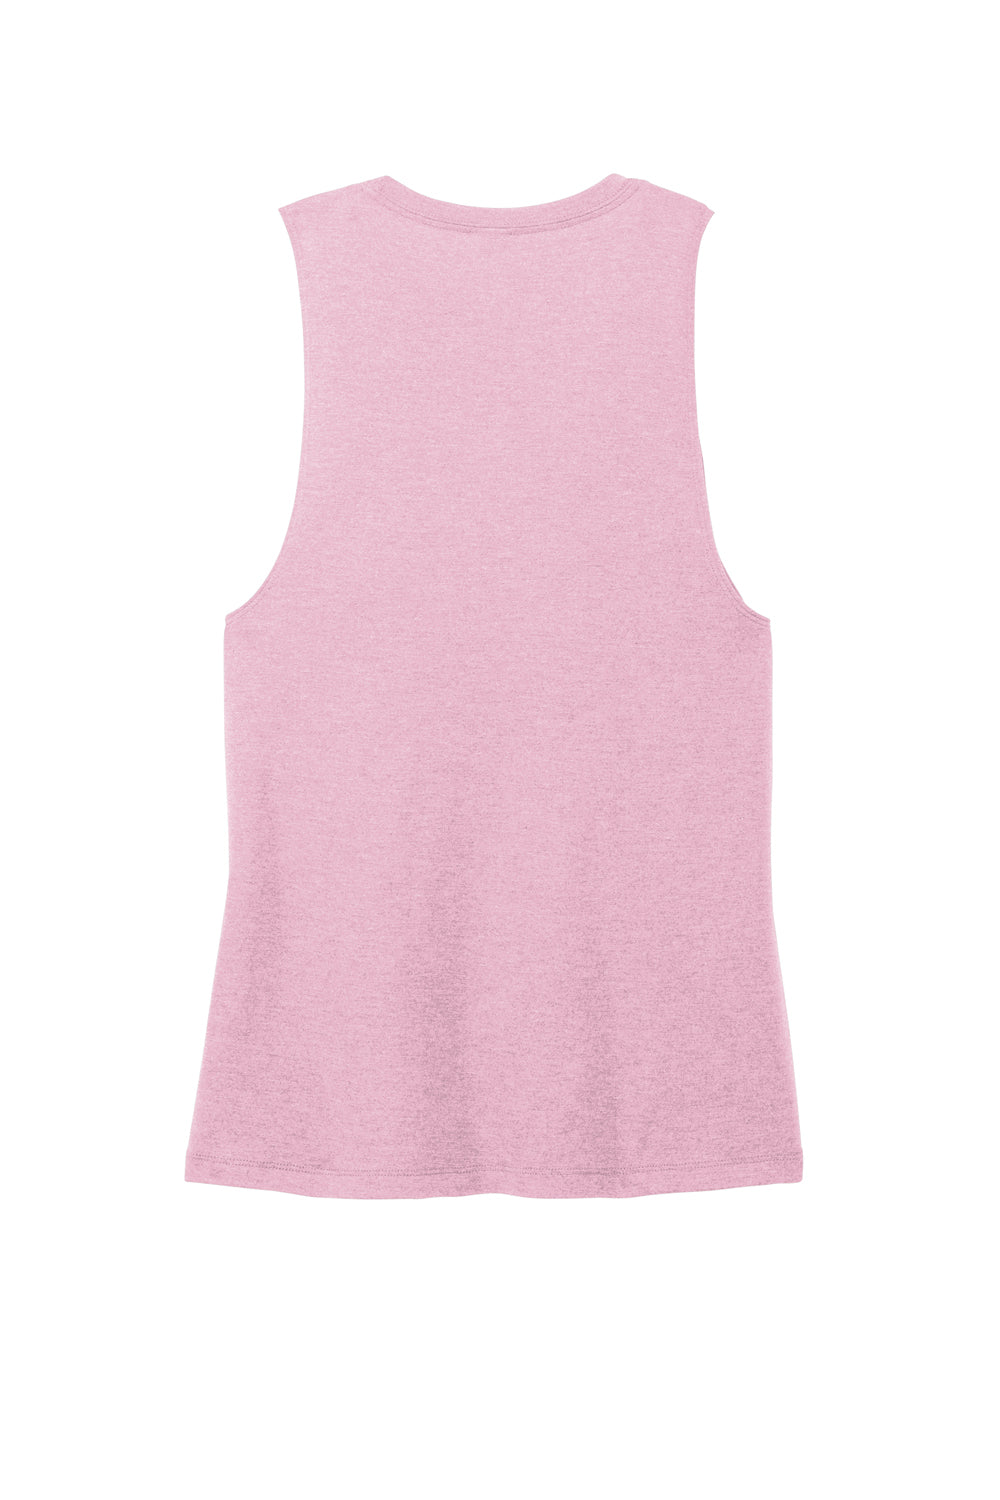 District DT153 Womens Perfect Tri Muscle Tank Top Heather Wisteria Pink Flat Back